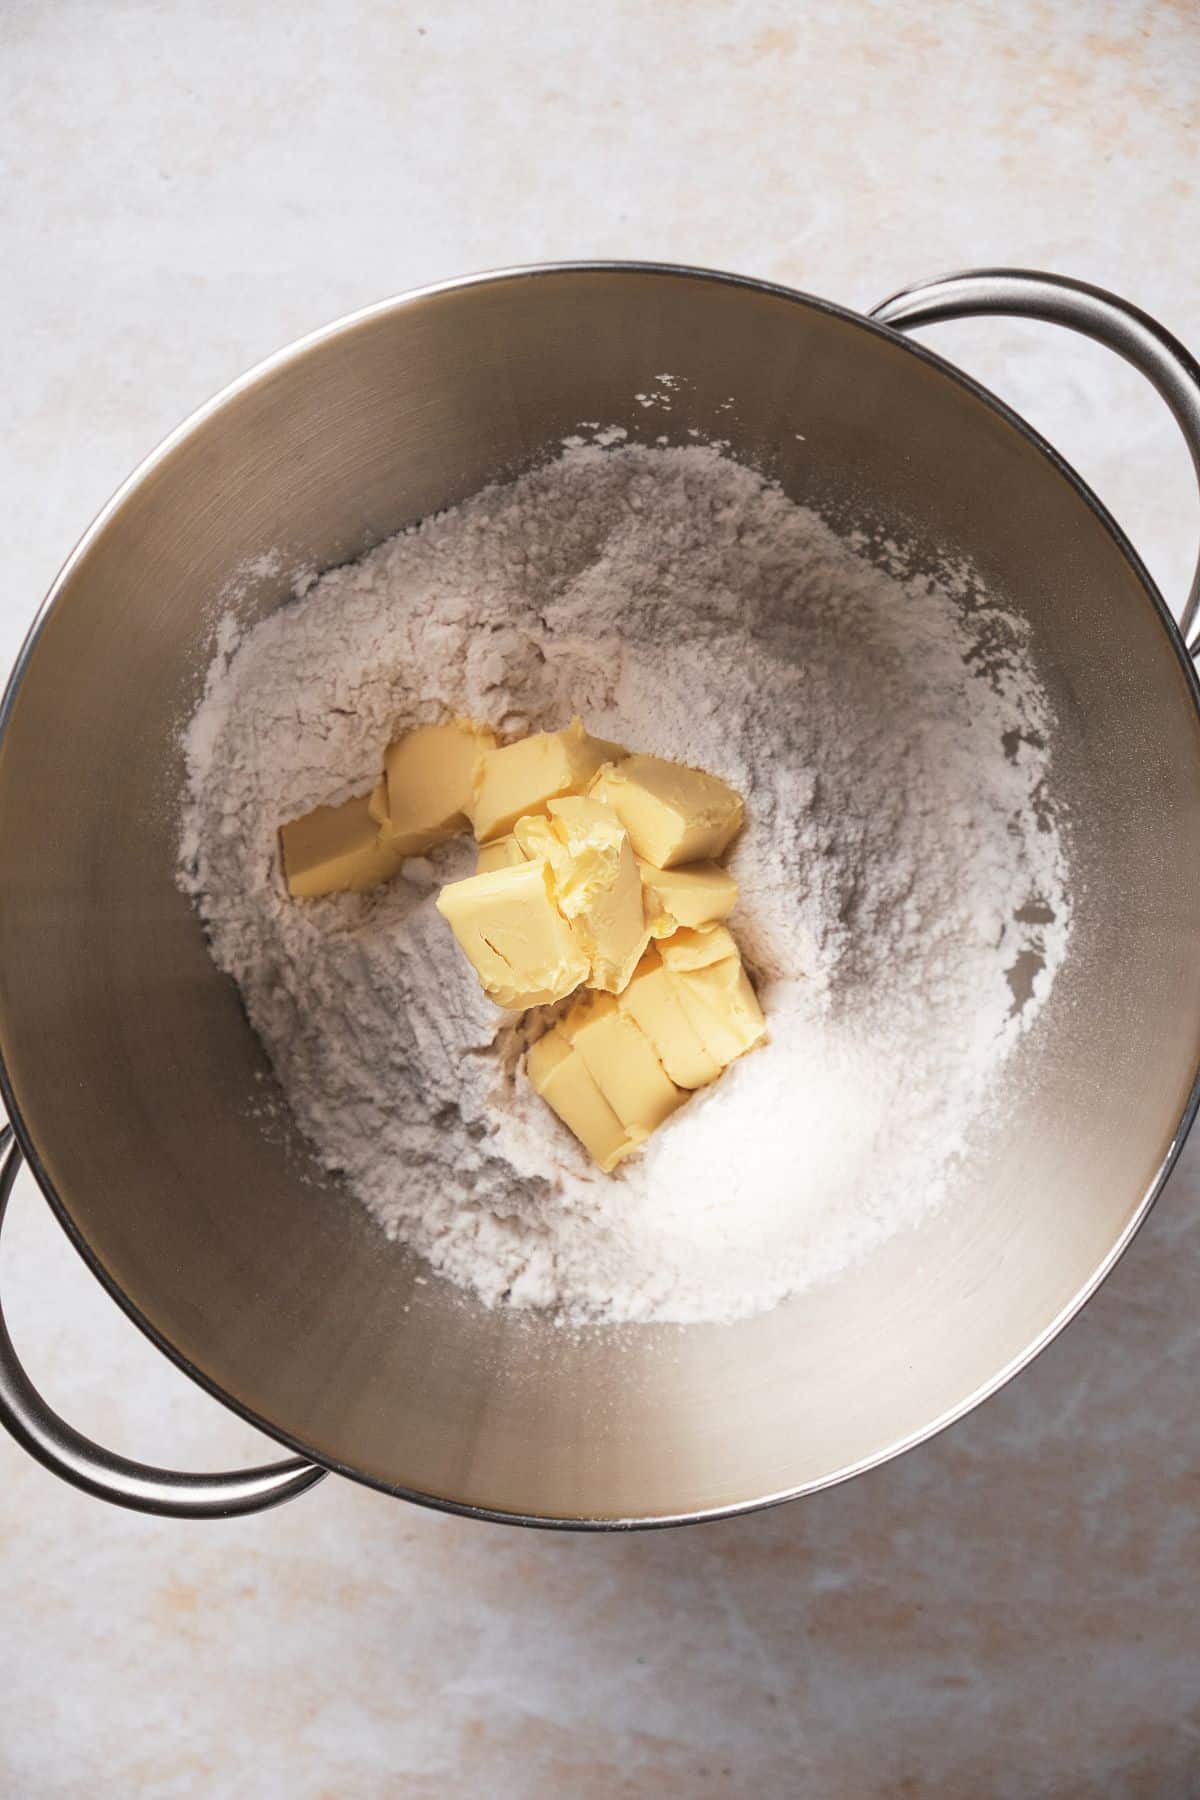 Butter in the mixing bowl to make coconut cake.